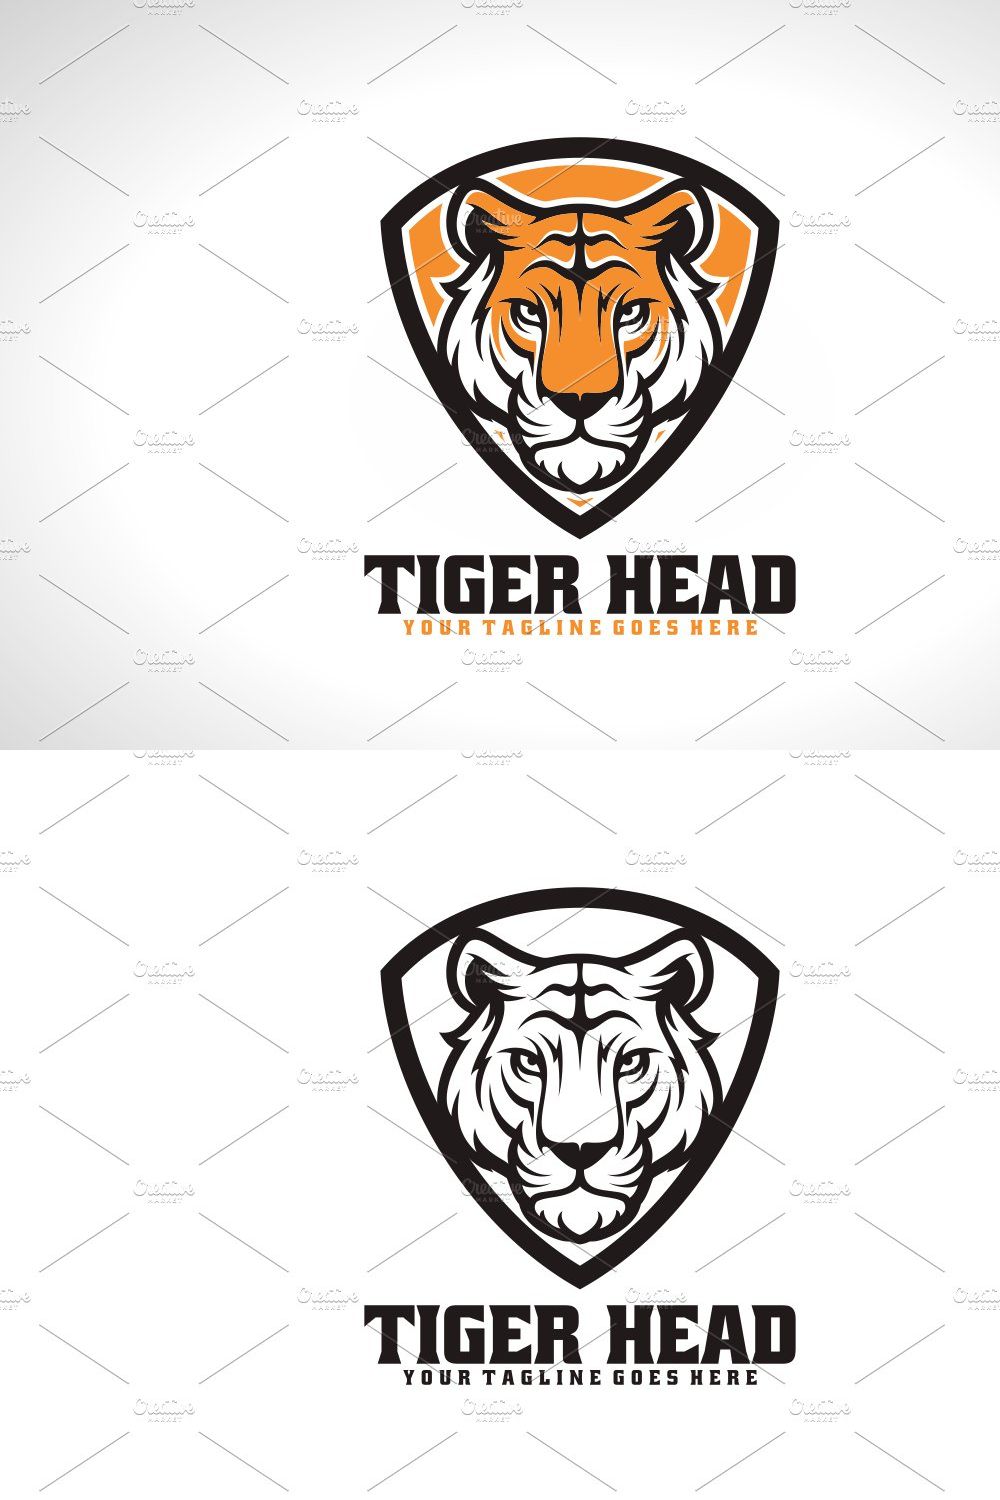 Tiger Head pinterest preview image.